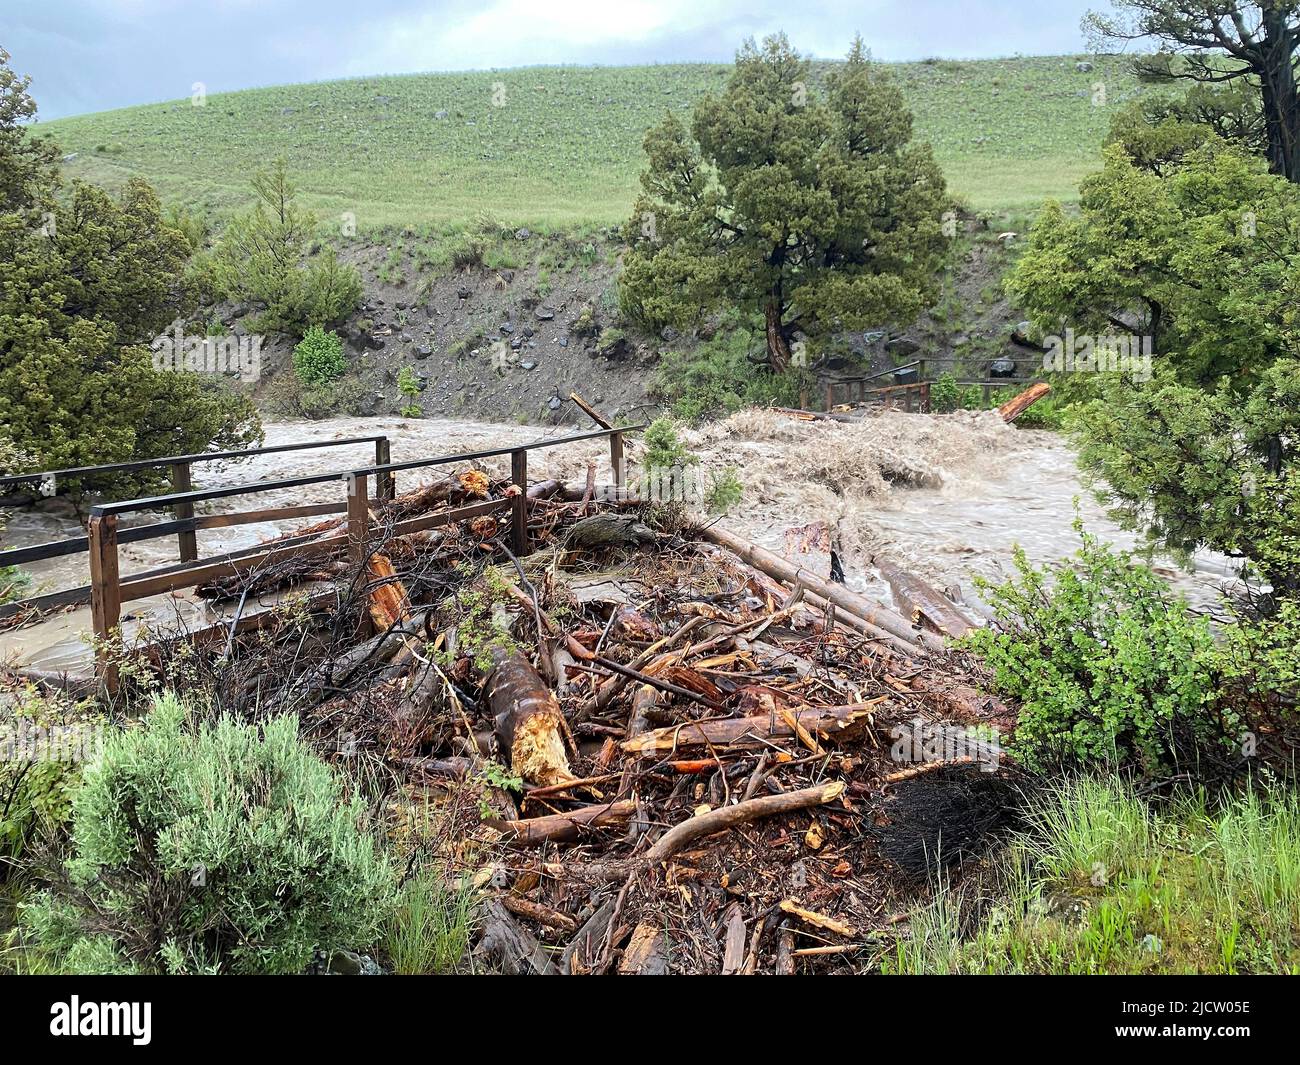 Yellowstone, United States. 13th June, 2022. Raging high water washes out a bridge at Rescue Creek after record rains and snow melt caused destructive floods closing Yellowstone National Park at the start of the high season, June 13, 2022 in Yellowstone, Montana. Credit: Jacob W. Frank/NPS Photo/Alamy Live News Stock Photo